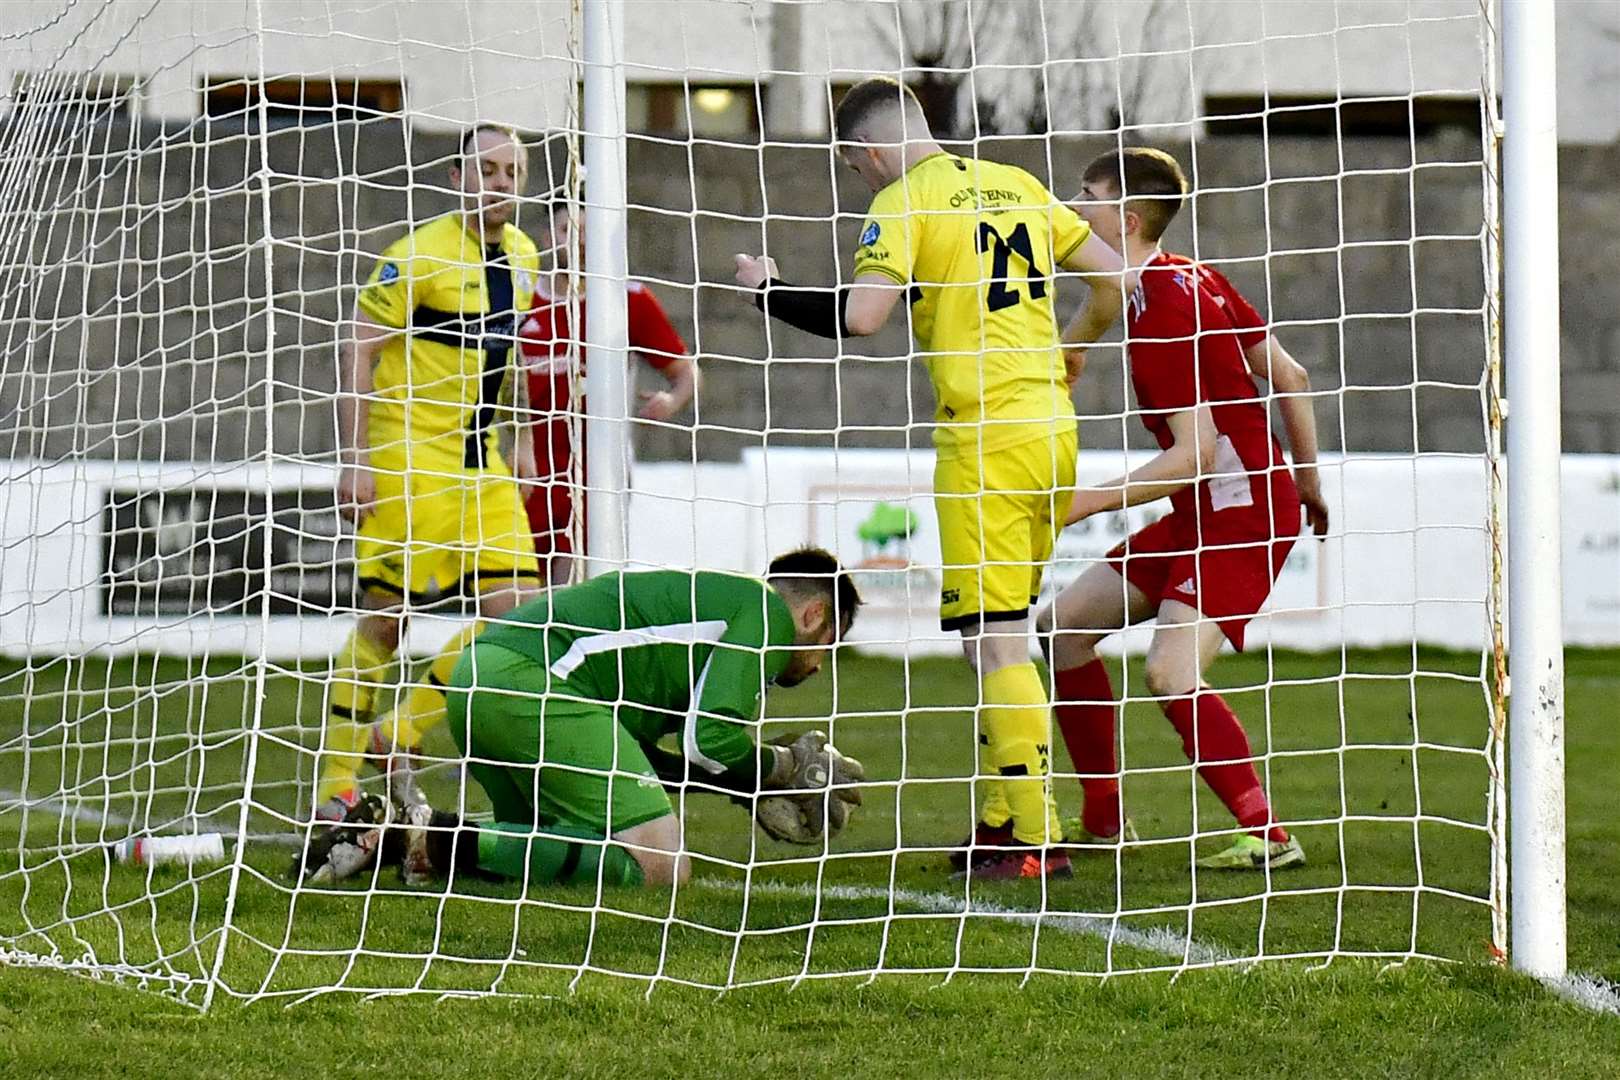 Wick Academy goalkeeper Gordon Clark pulls off a last-ditch save on the line to deny Lossiemouth's Jack Gordon during the 2-0 victory at Grant Park. Picture: Mel Roger